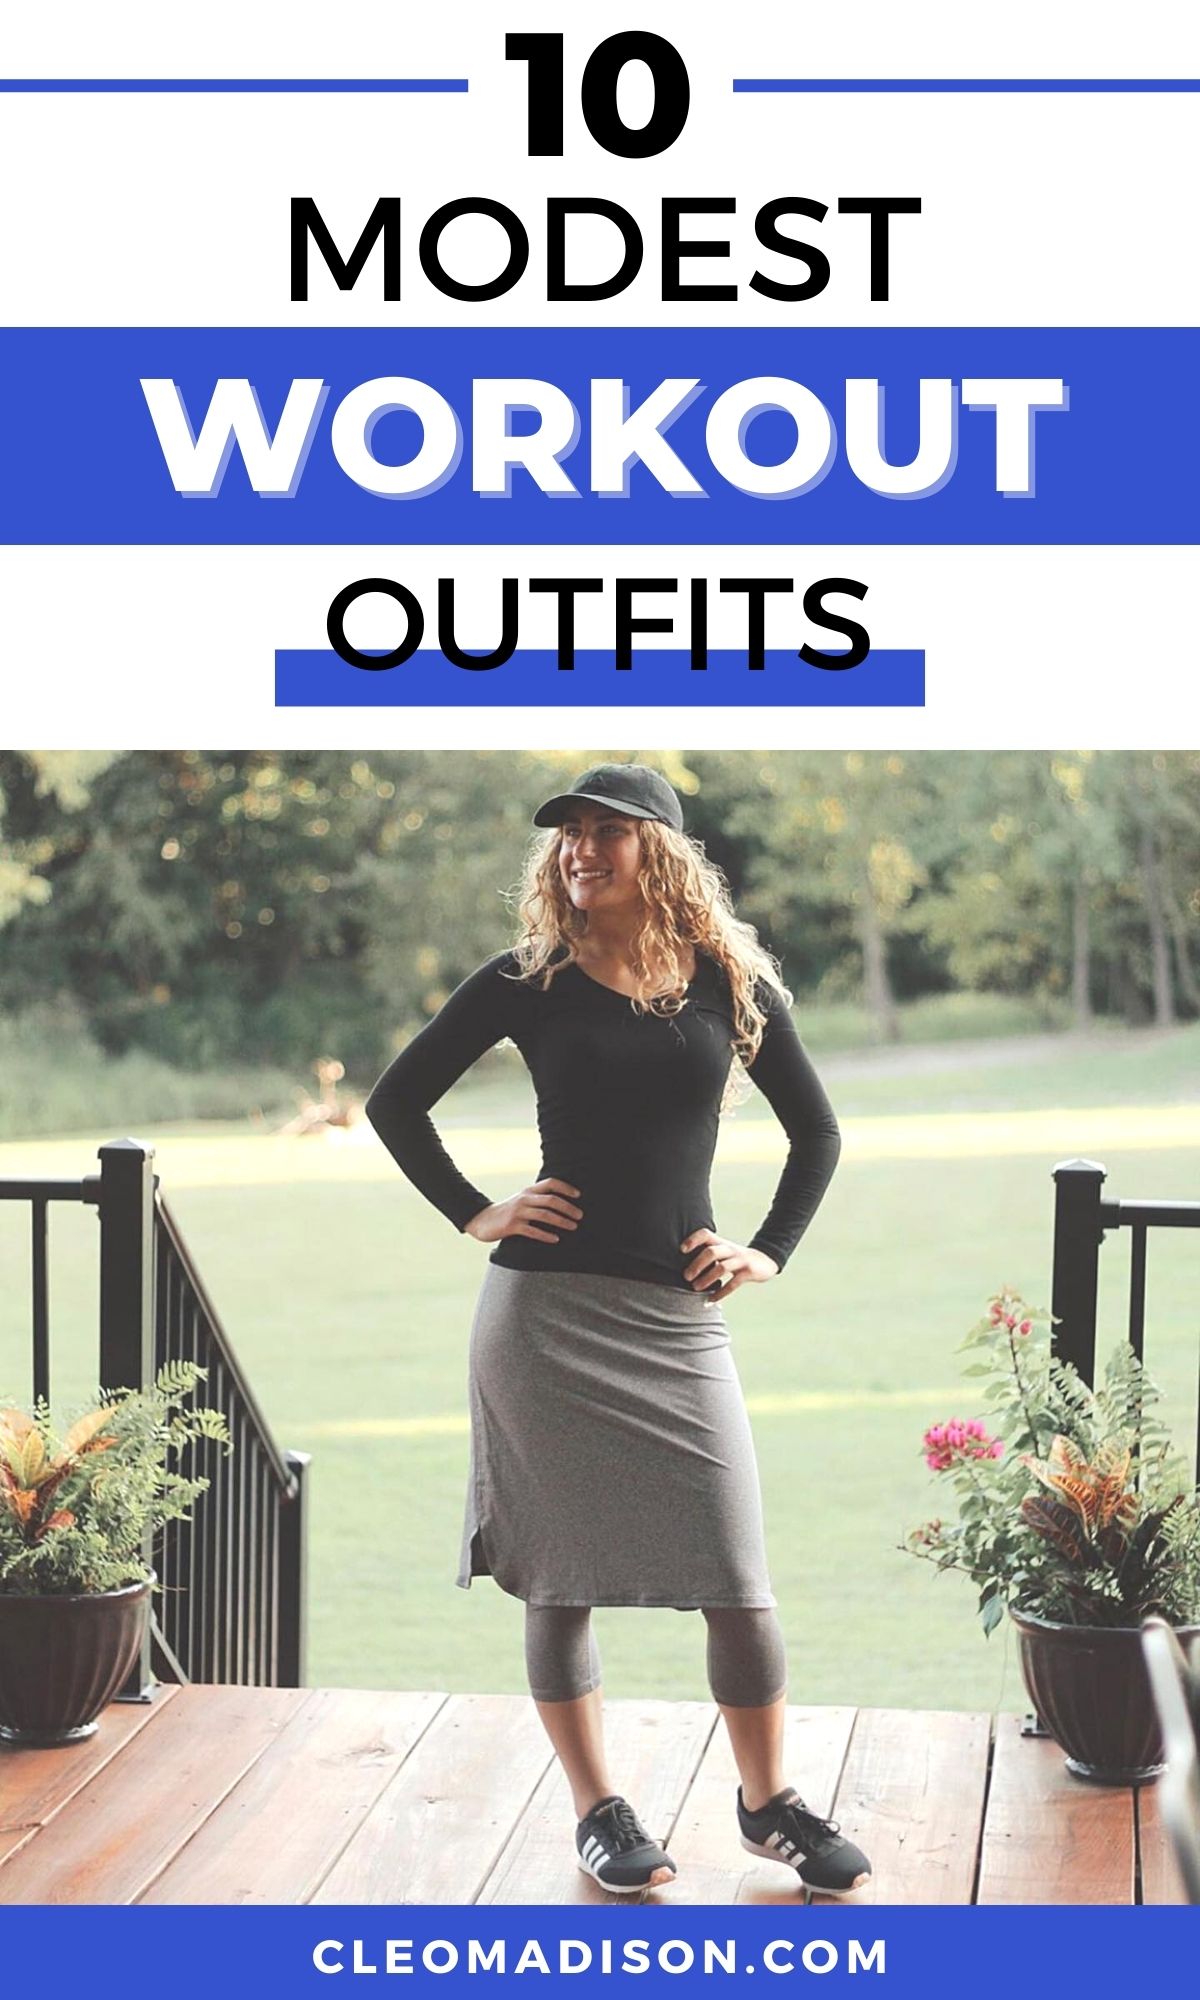 modest workout outfits